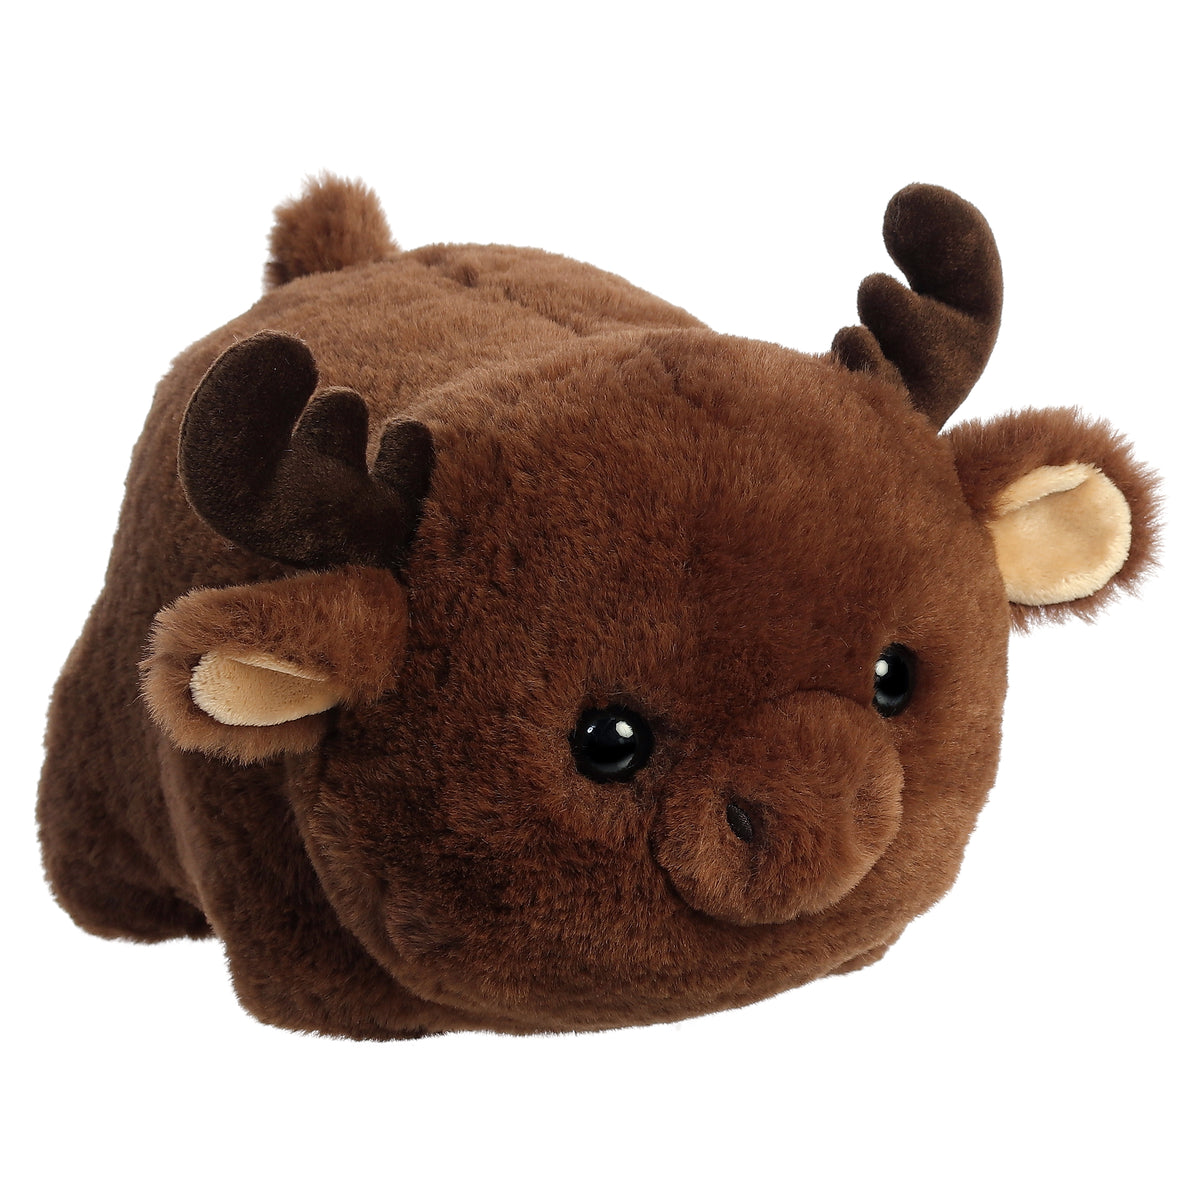 Morty Moose plush from the Spudsters collection by Aurora, with a soft brown coat, adorable antlers, and a huggable face